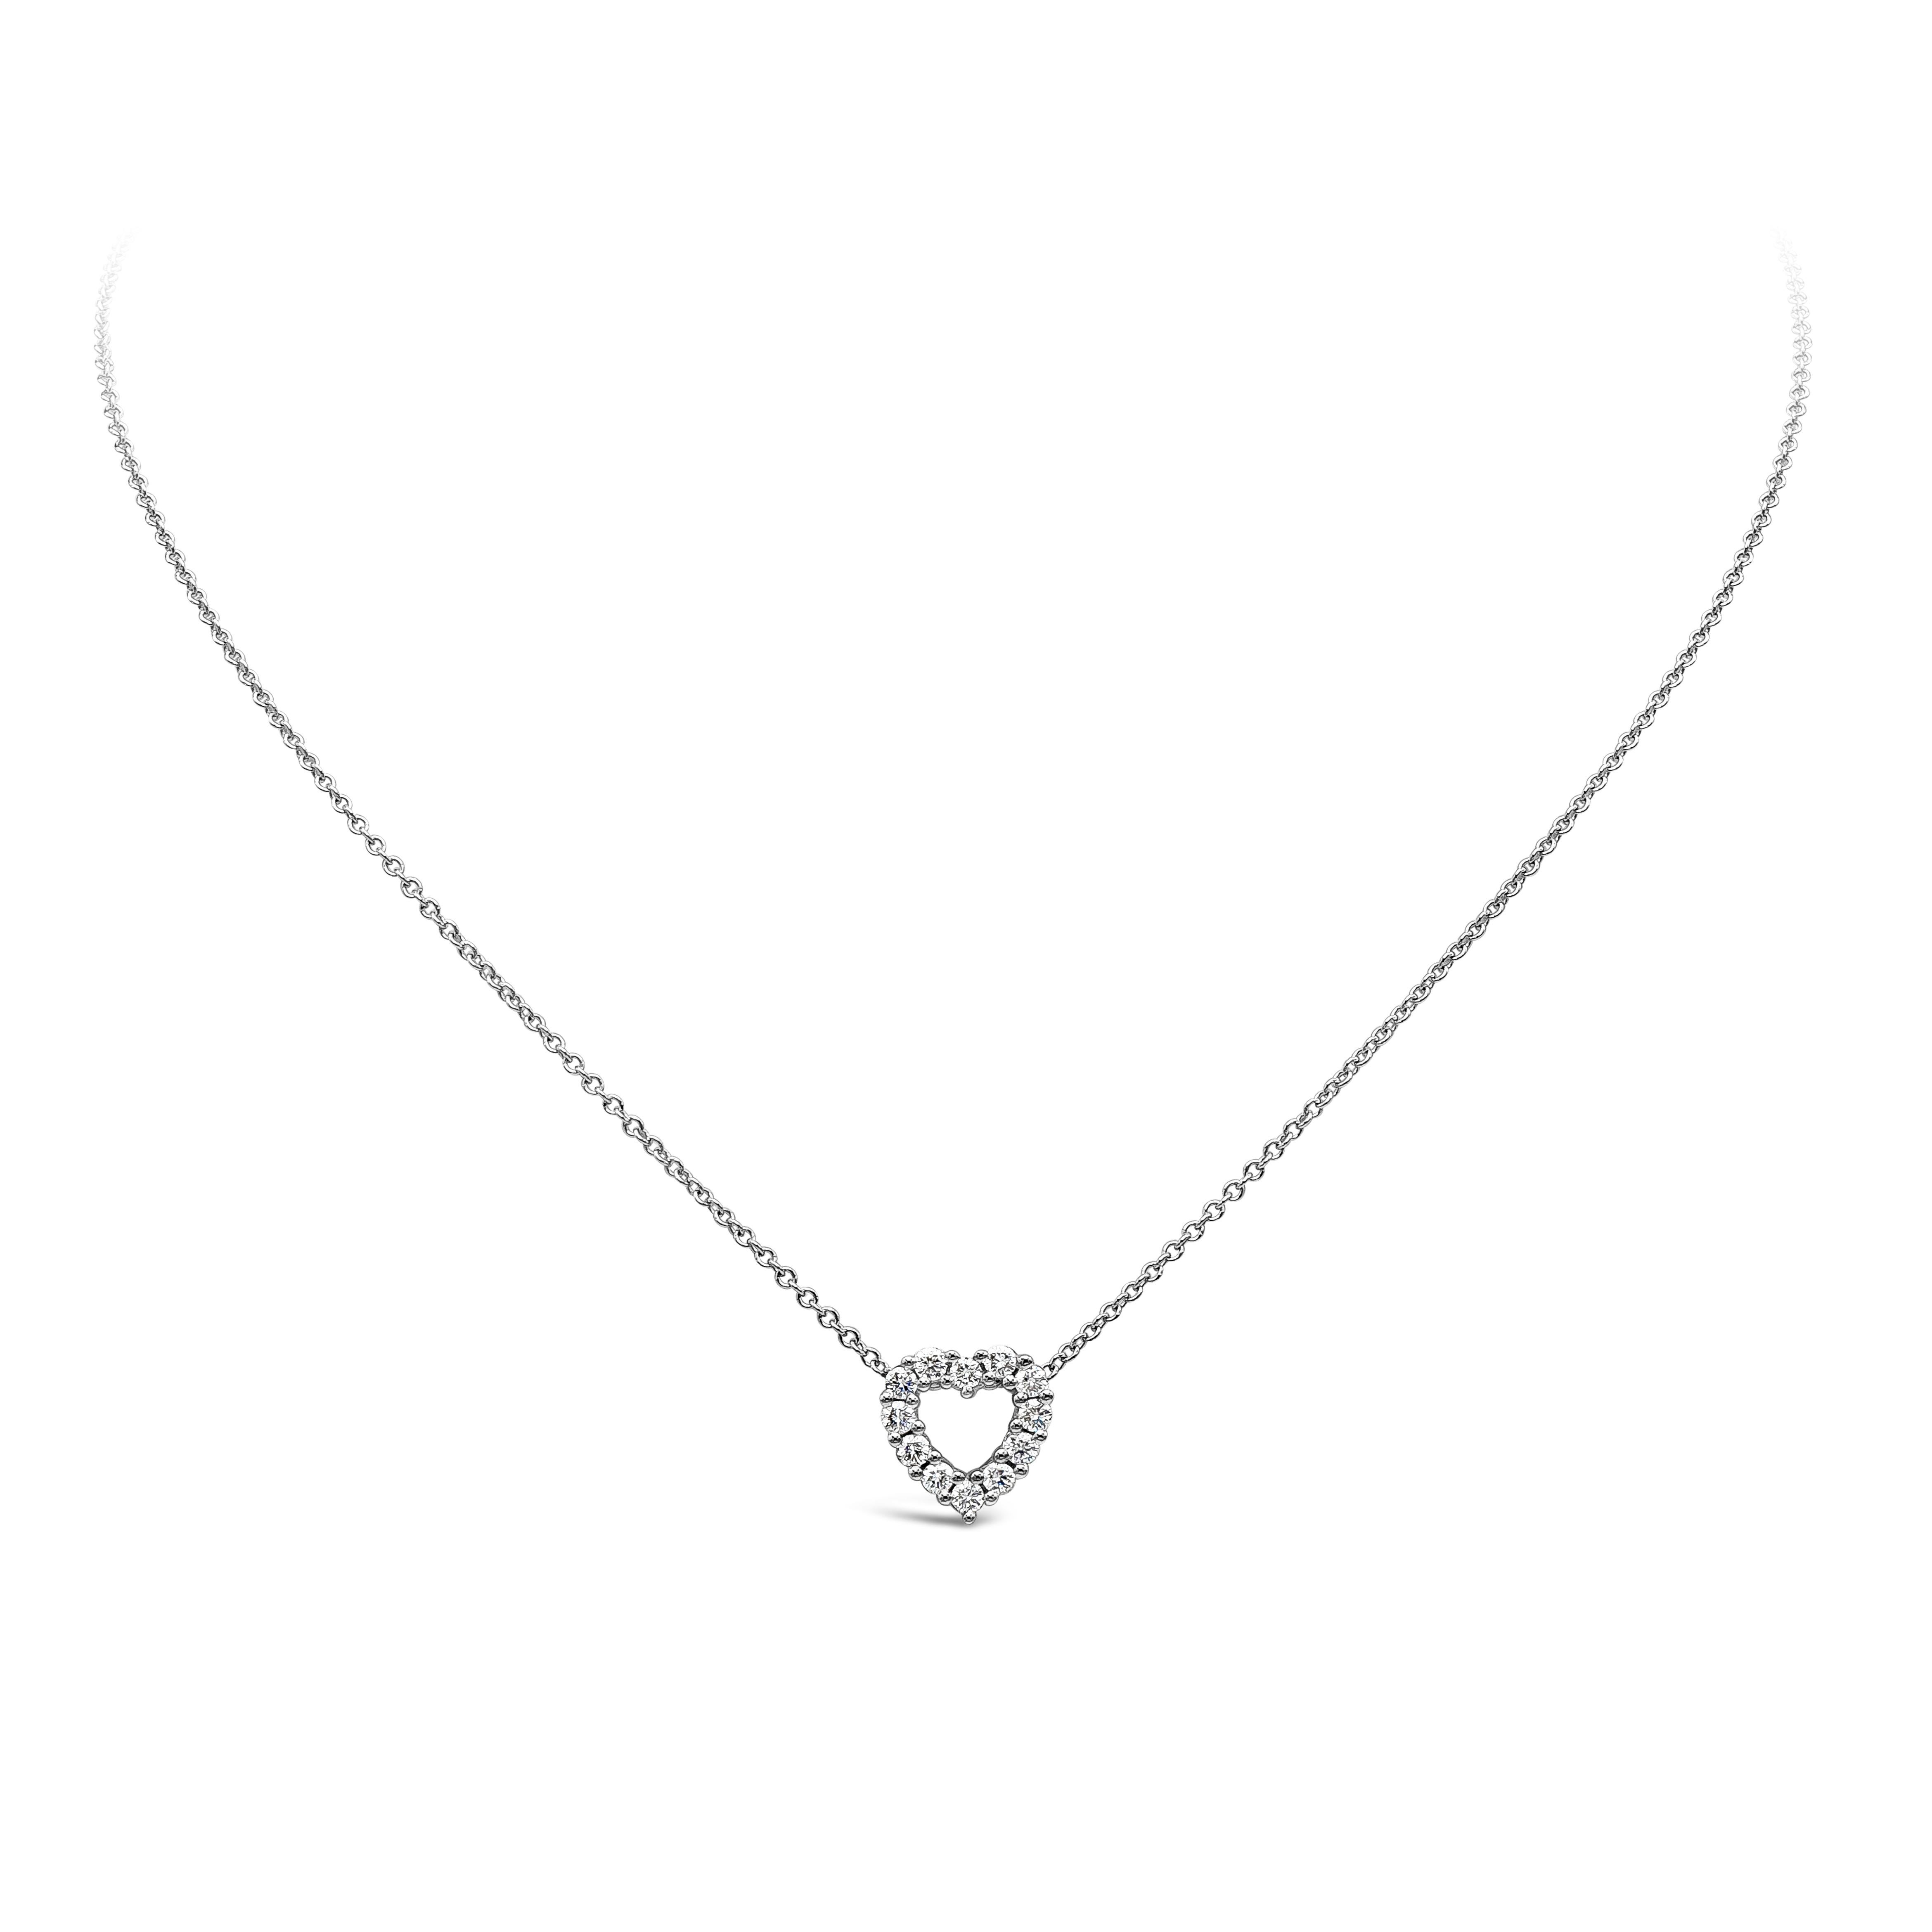 A simple pendant necklace showcasing a row of round brilliant diamonds weighing 0.35 carats total, set in an open-work heart shape mounting made in 18k white gold. Suspended on an 16 inch adjustable white gold chain.

Roman Malakov is a custom